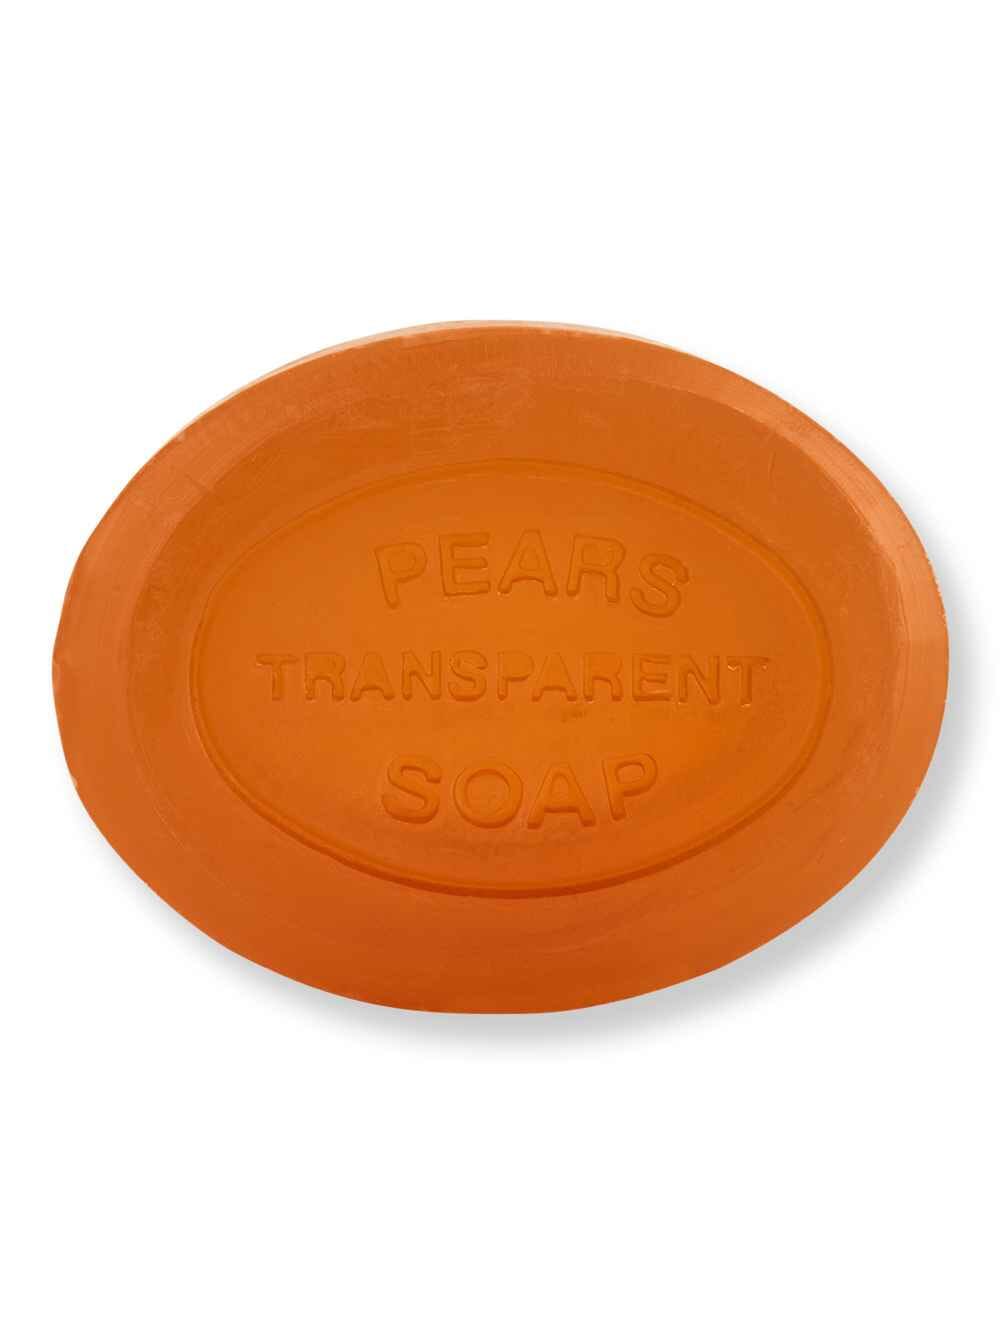 Pears Pears Transparent Soap Gentle Care 4.4 oz125 g Bar Soaps 